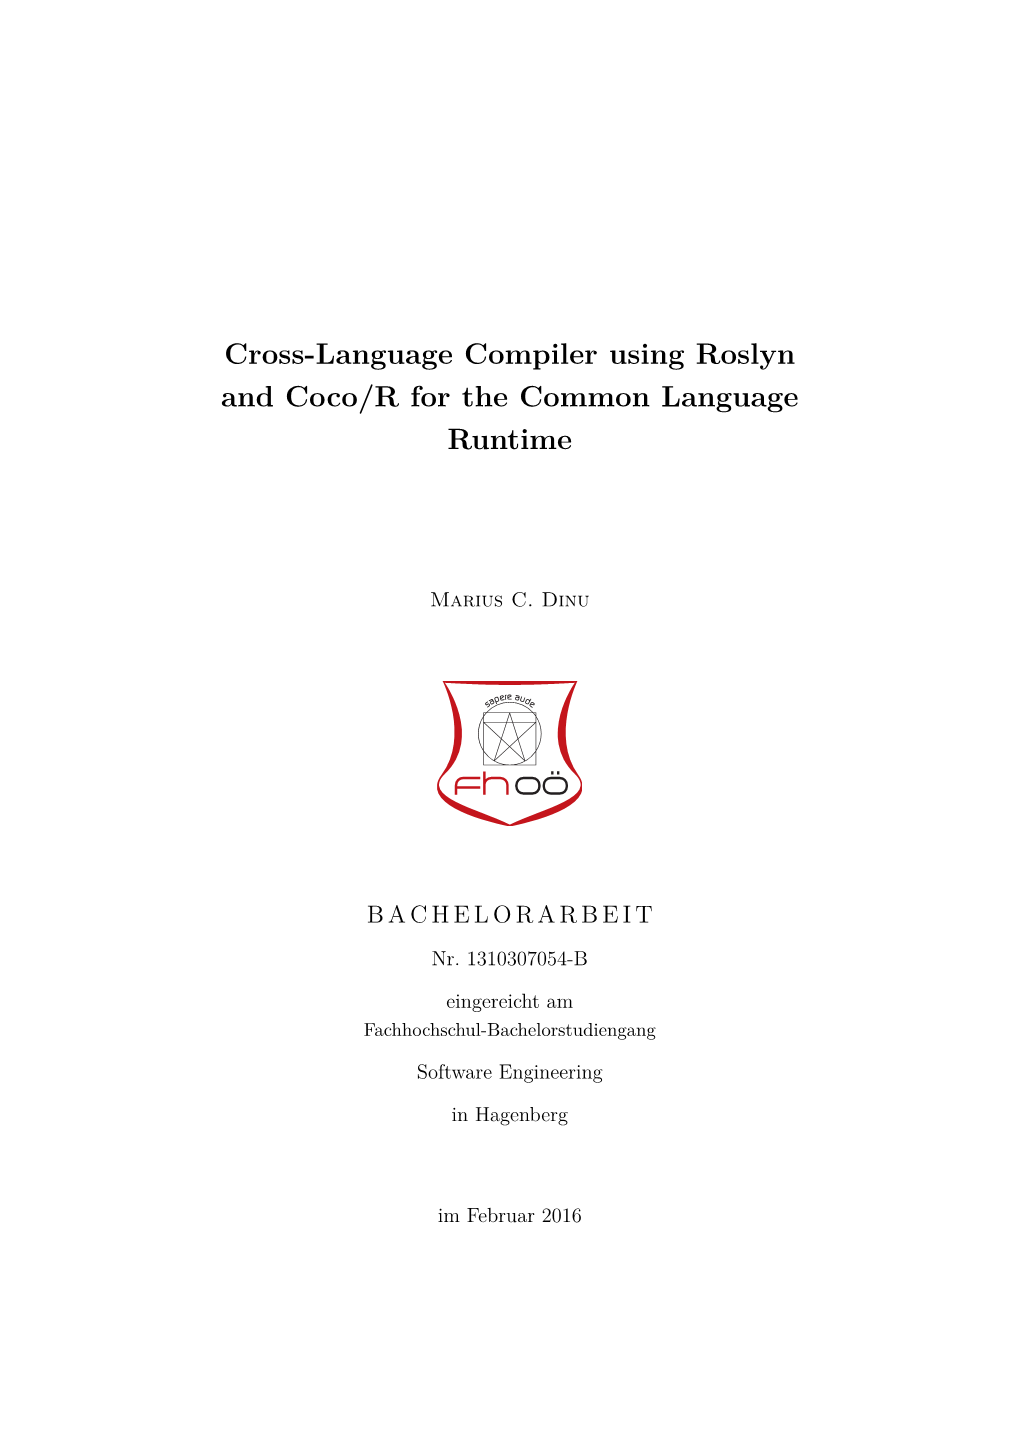 Cross-Language Compiler Using Roslyn and Coco/R for the Common Language Runtime